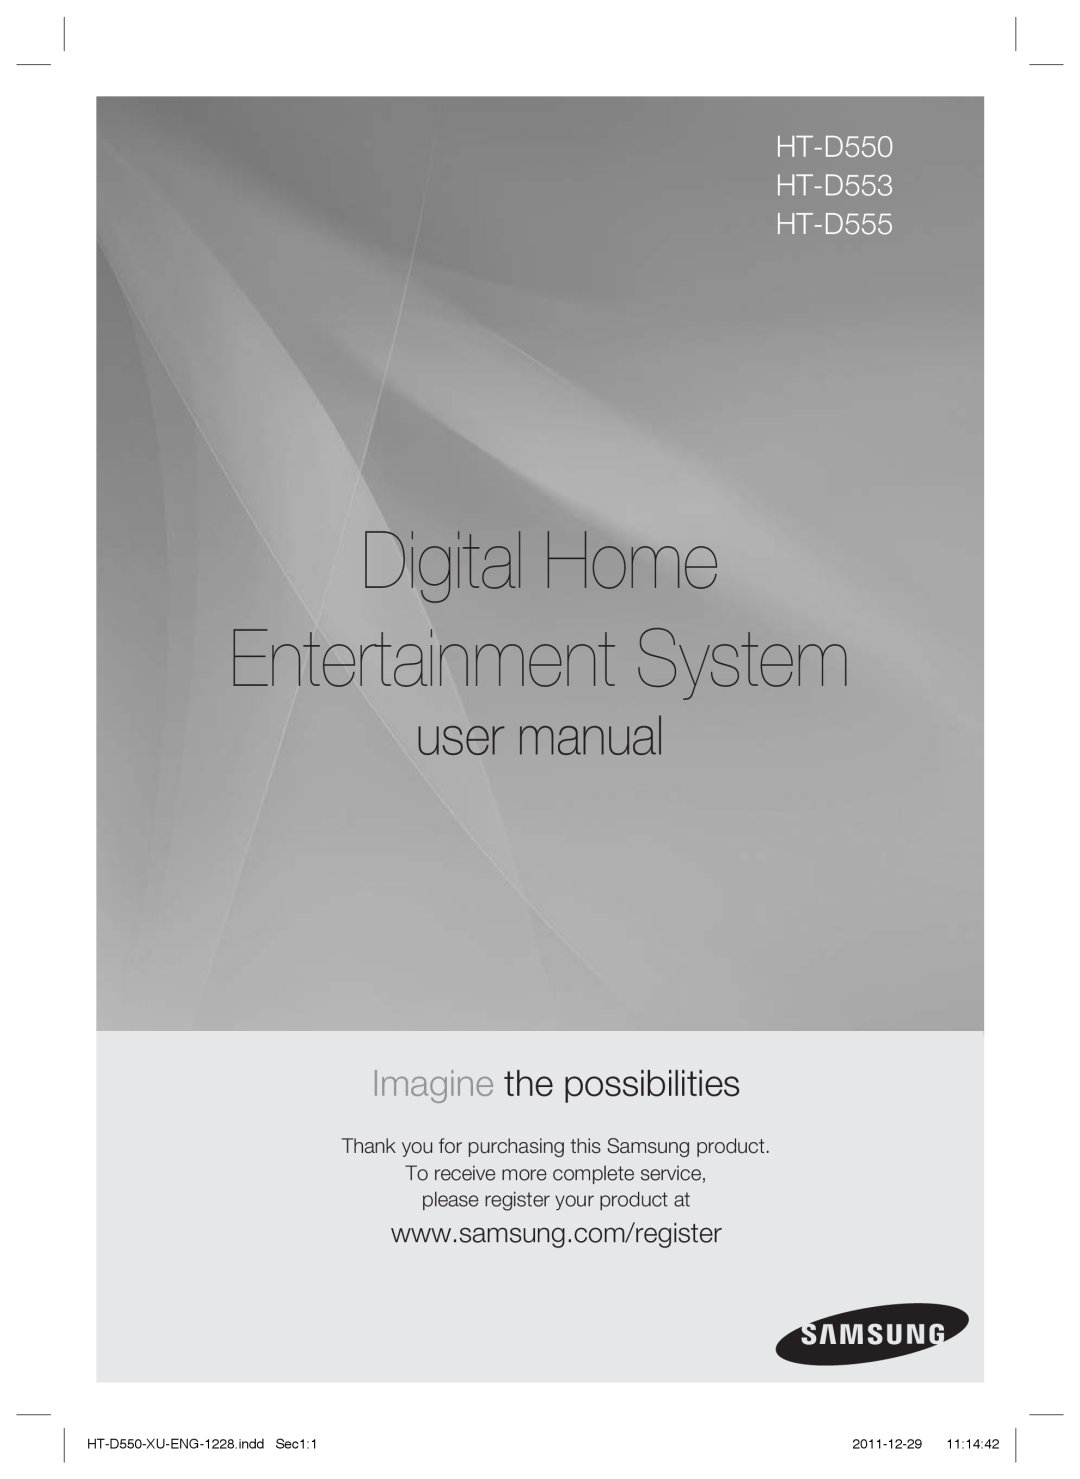 Samsung HT-D555/TK manual Digital Home Entertainment System, user manual, Imagine the possibilities, 2011-12-29 